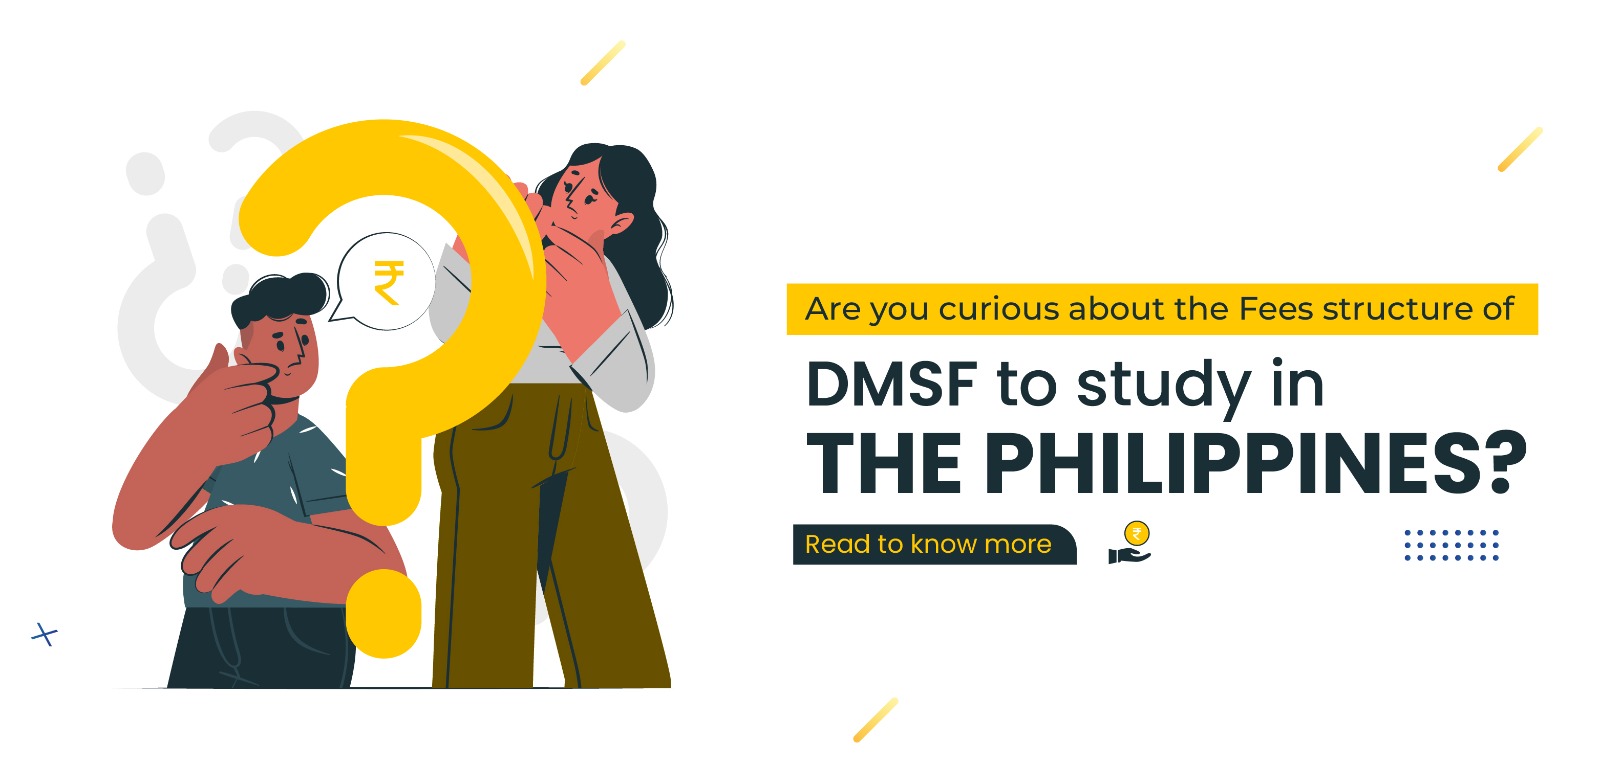 Are you curious about the Fees structure of DMSF to study in the Philippines?